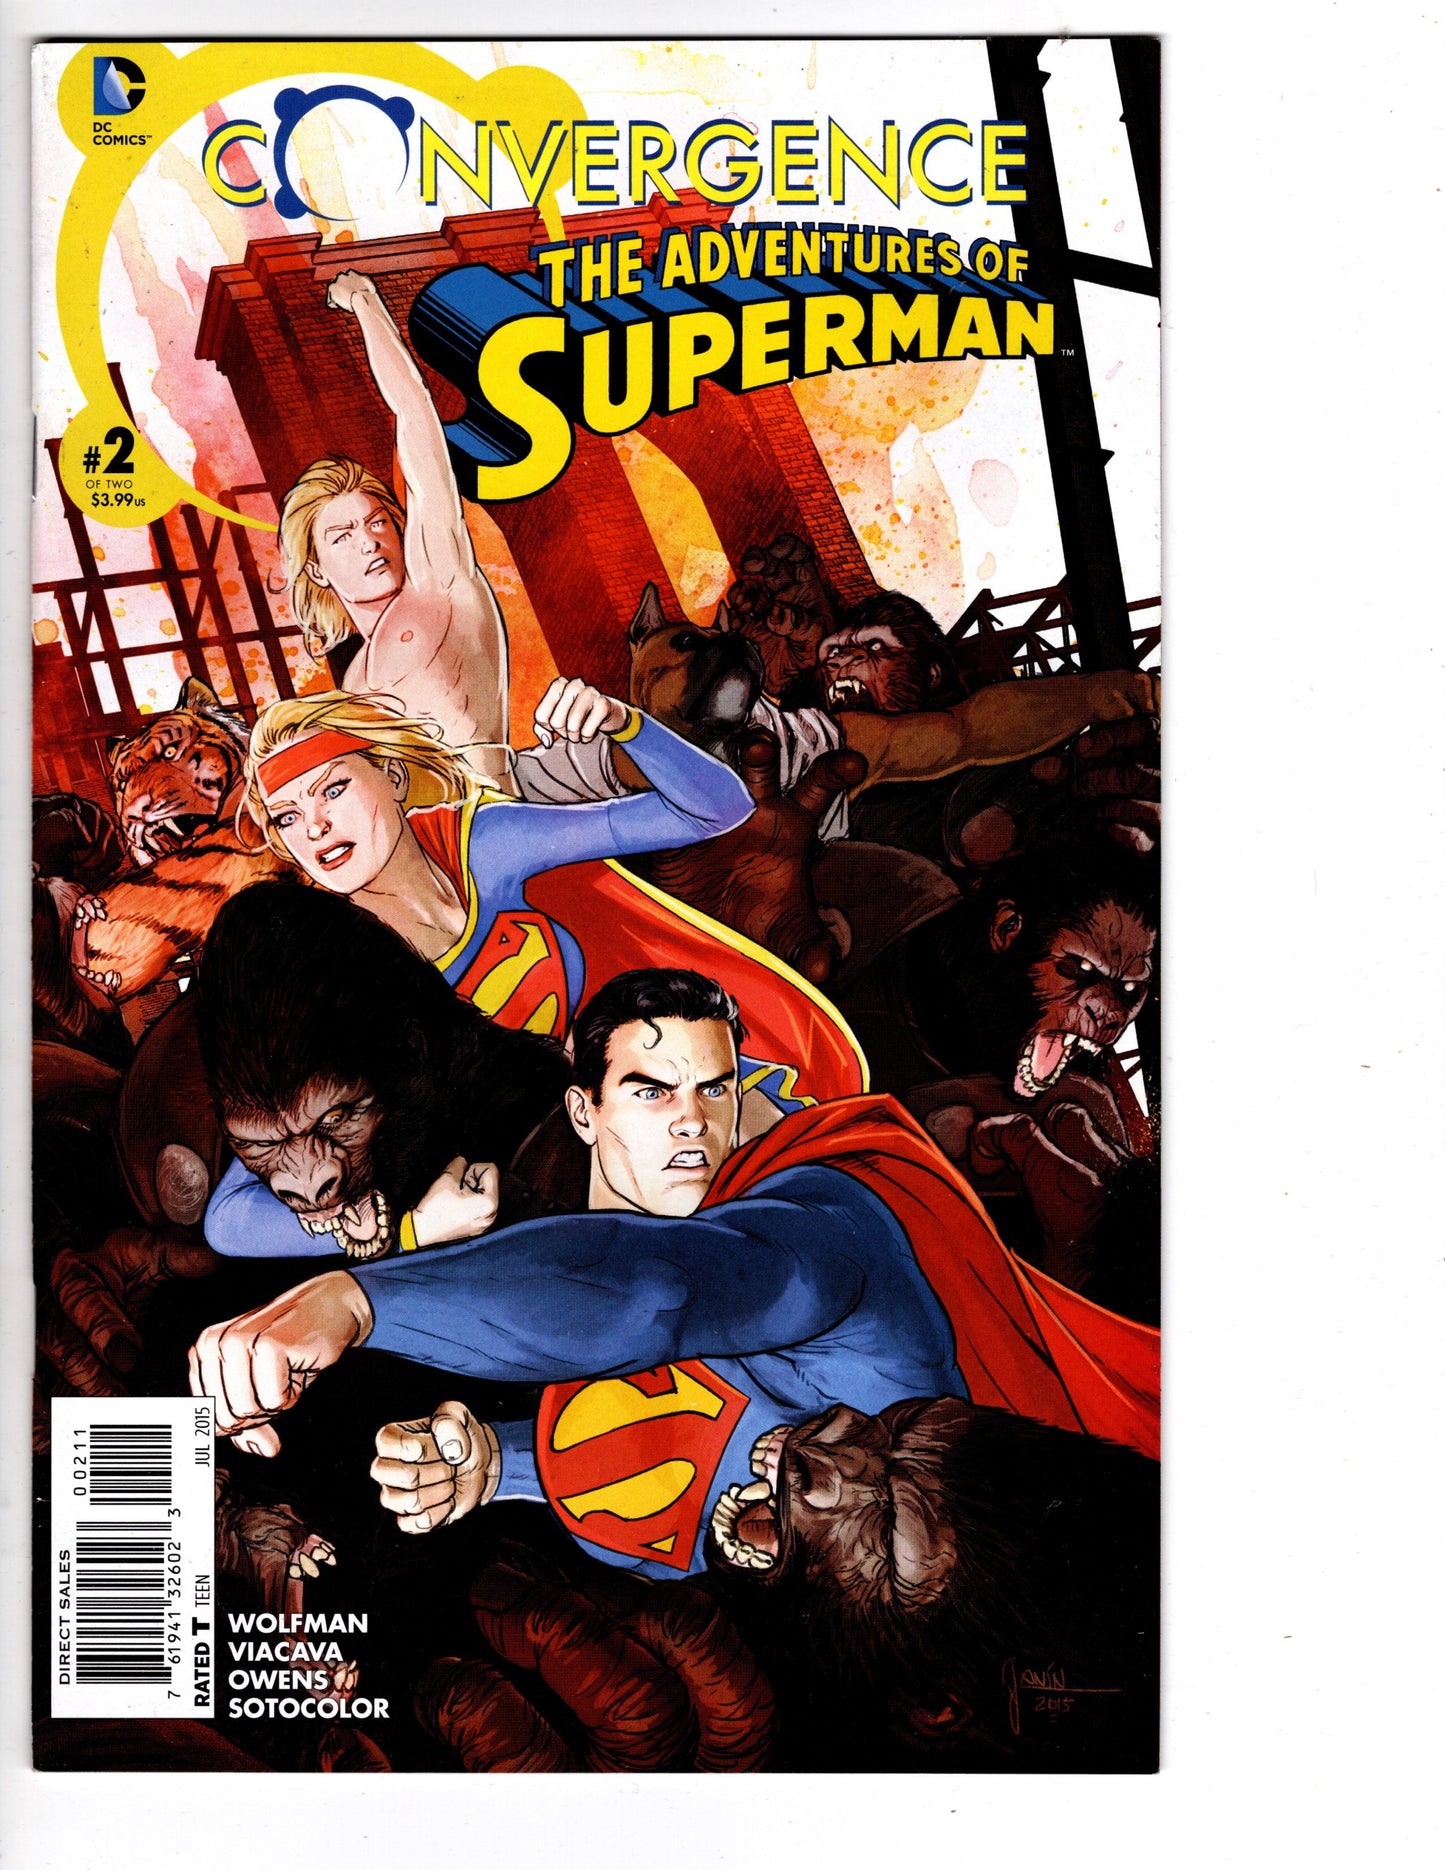 The Adventures of Superman #2